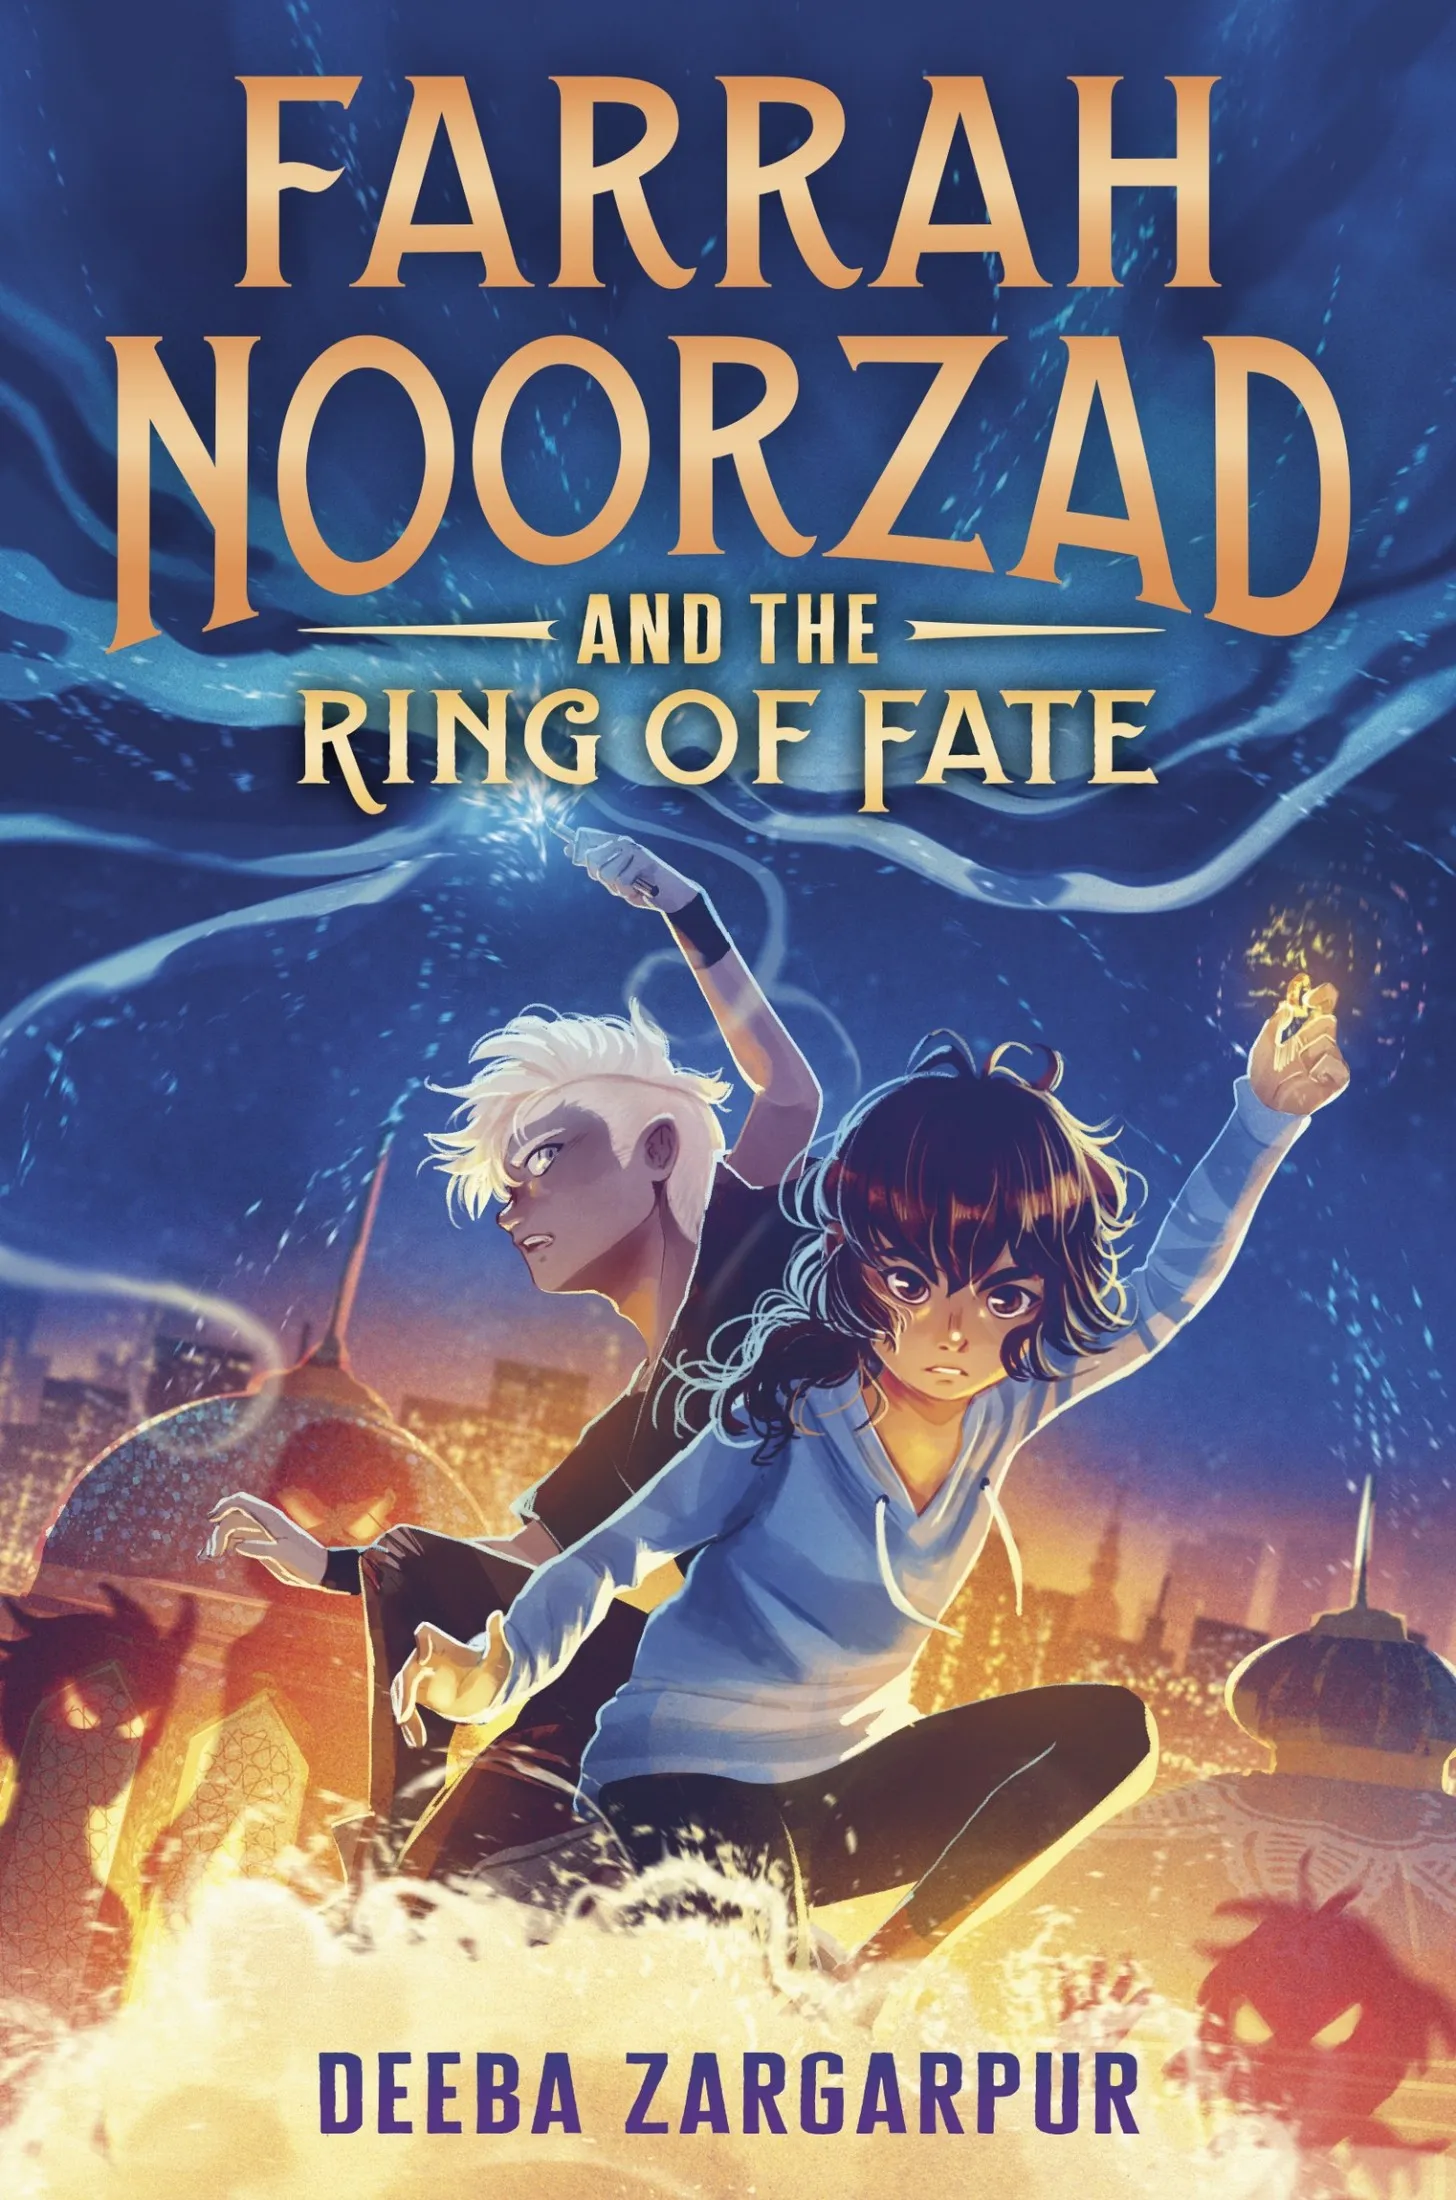 Farrah Noorzad and the Ring of Fate (Farrah Noorzad #1)